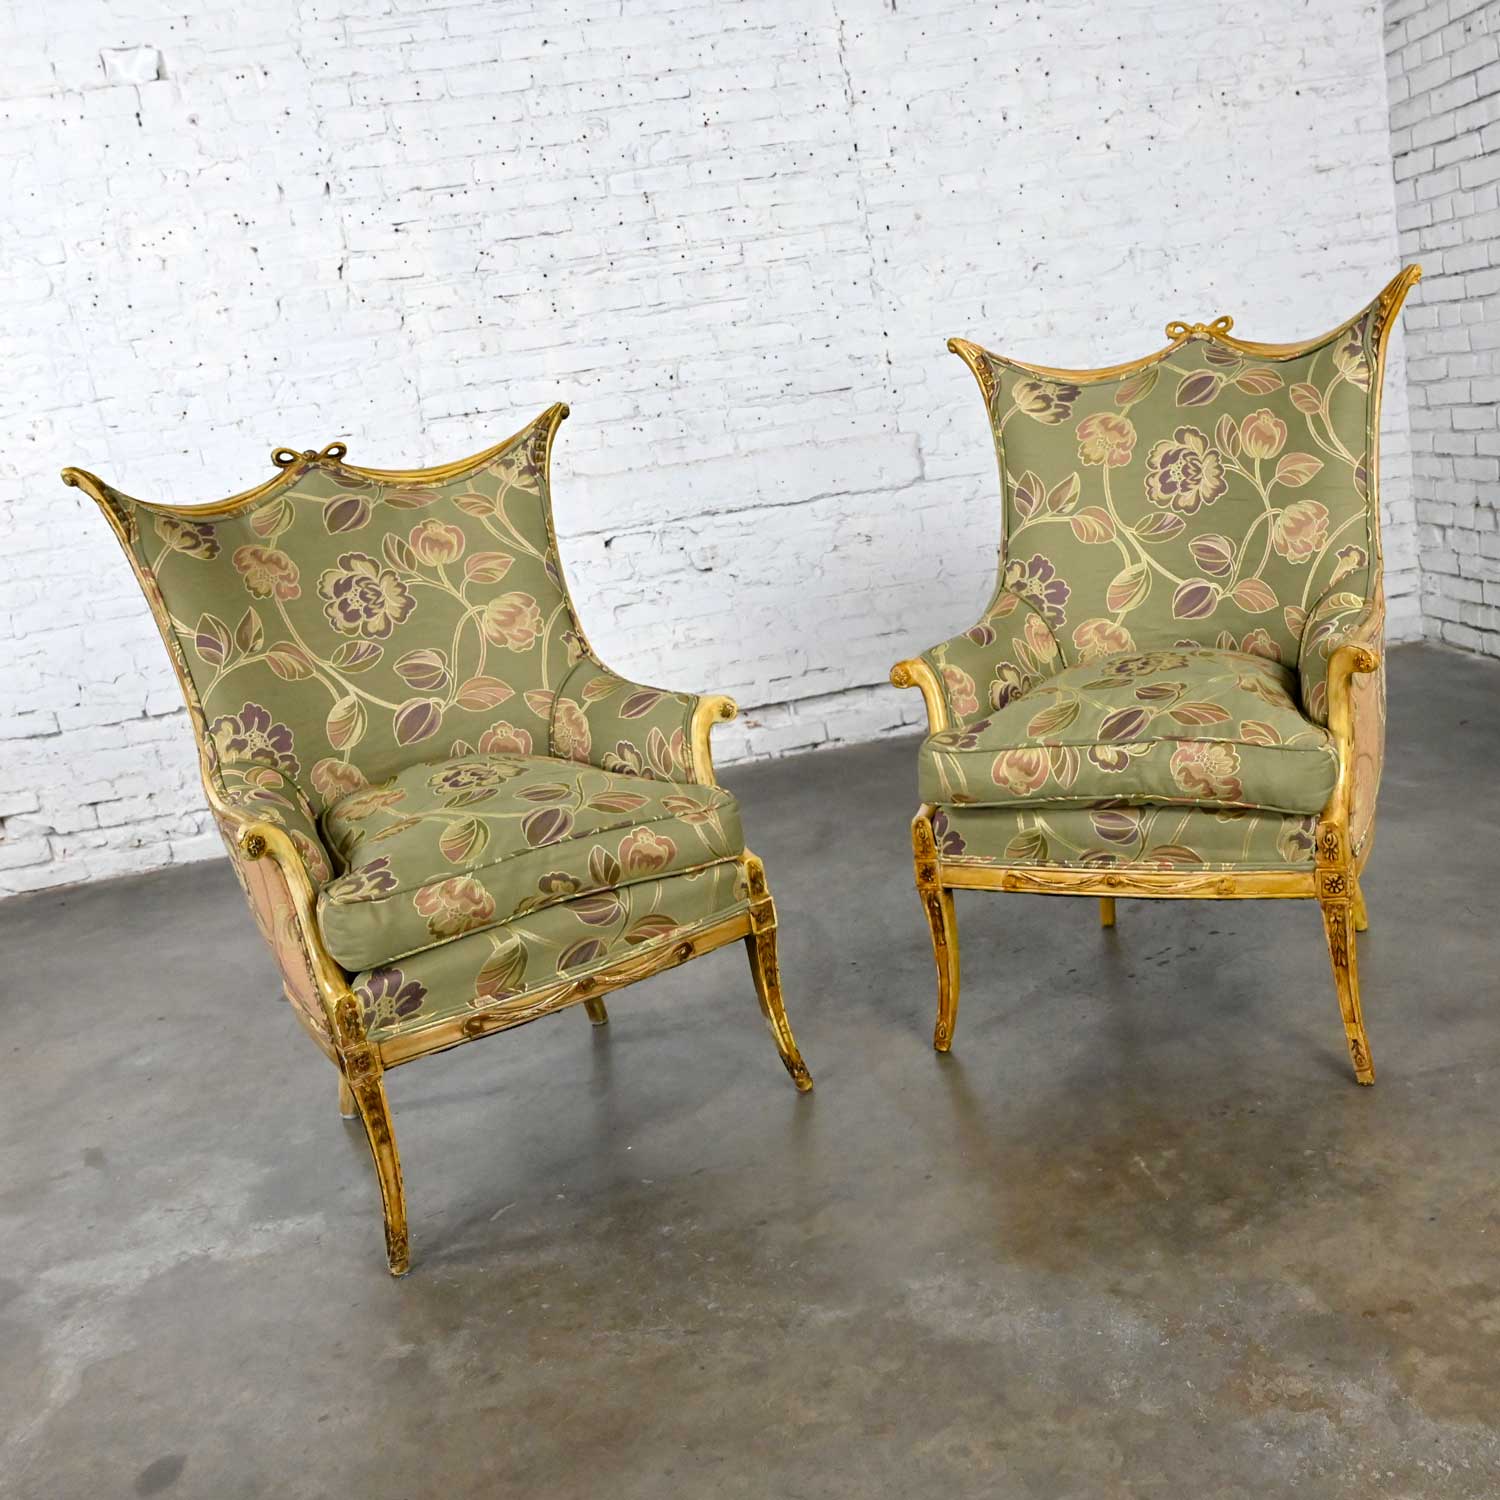 Vintage French Style Pair of Distressed Painted Armchairs Neoclassical Hollywood Regency Flair